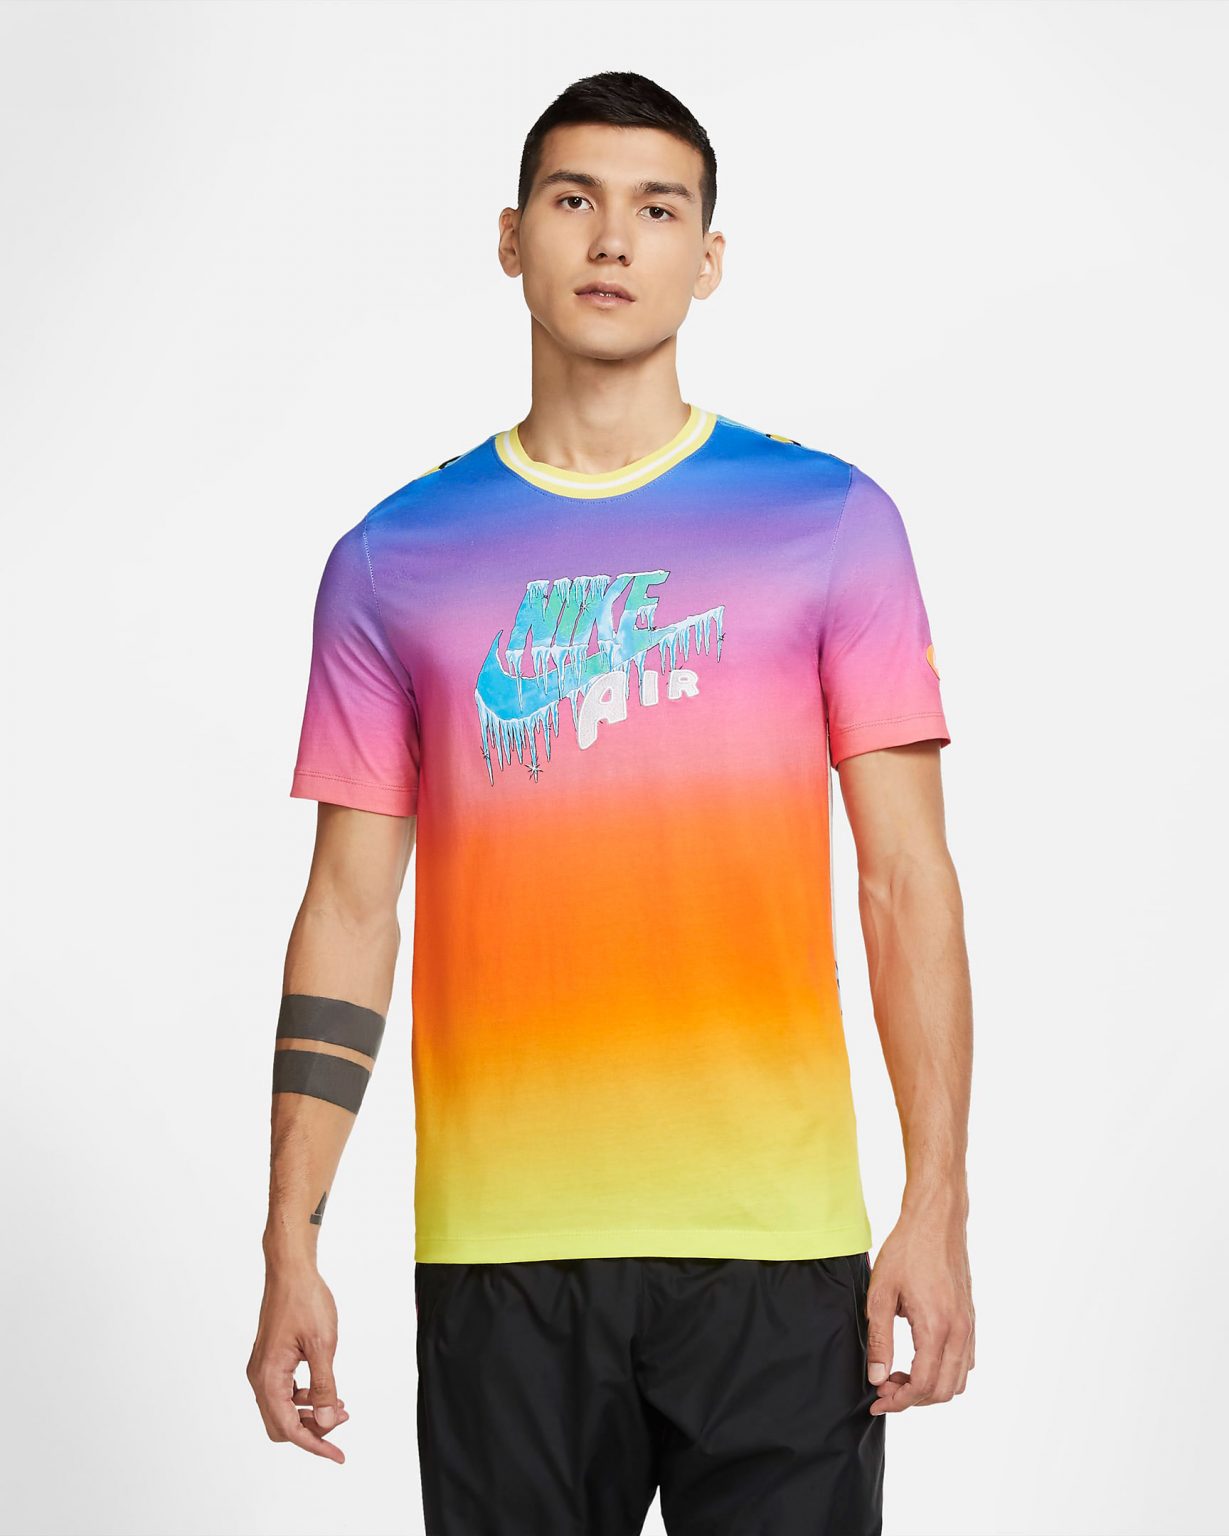 Nike Air Max Drip Pack Shirts and Clothing | SneakerFits.com